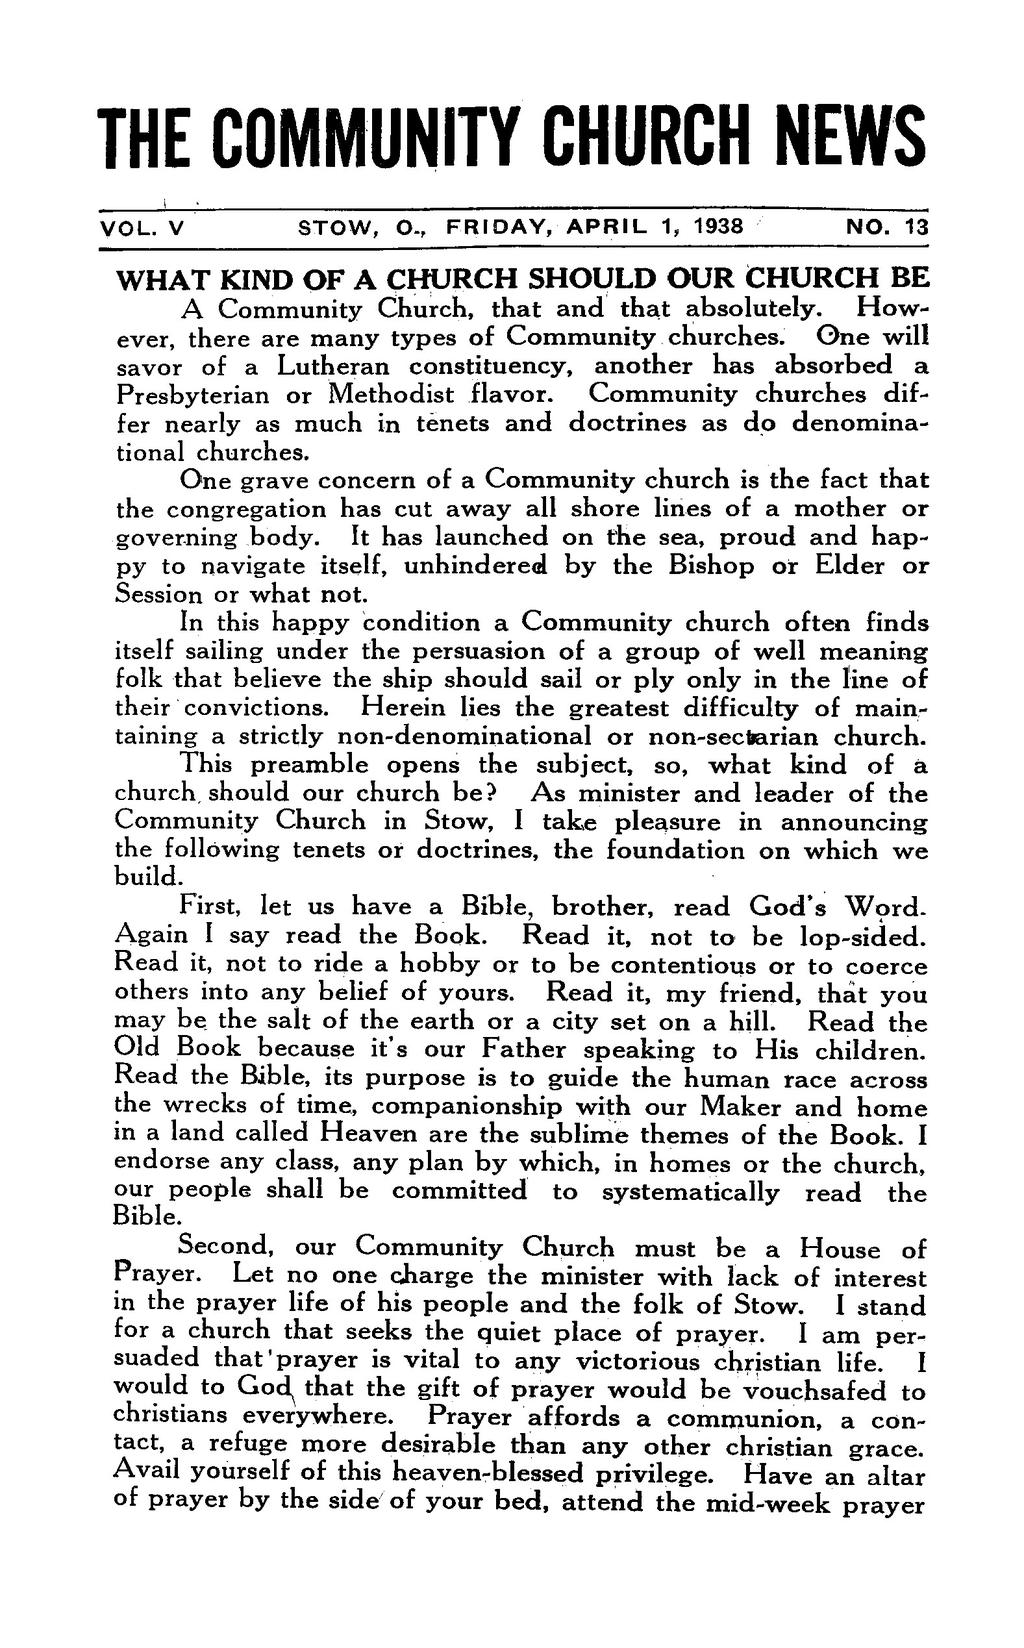 THE COMMUNITY CHURCH NEWS VOL. V STOW, O., FRIDAY, APRIL 1, 1938 NO. 13 WHAT KIND OF A CHURCH SHOULD OUR CHURCH BE A Community Church, that and that absolutely.